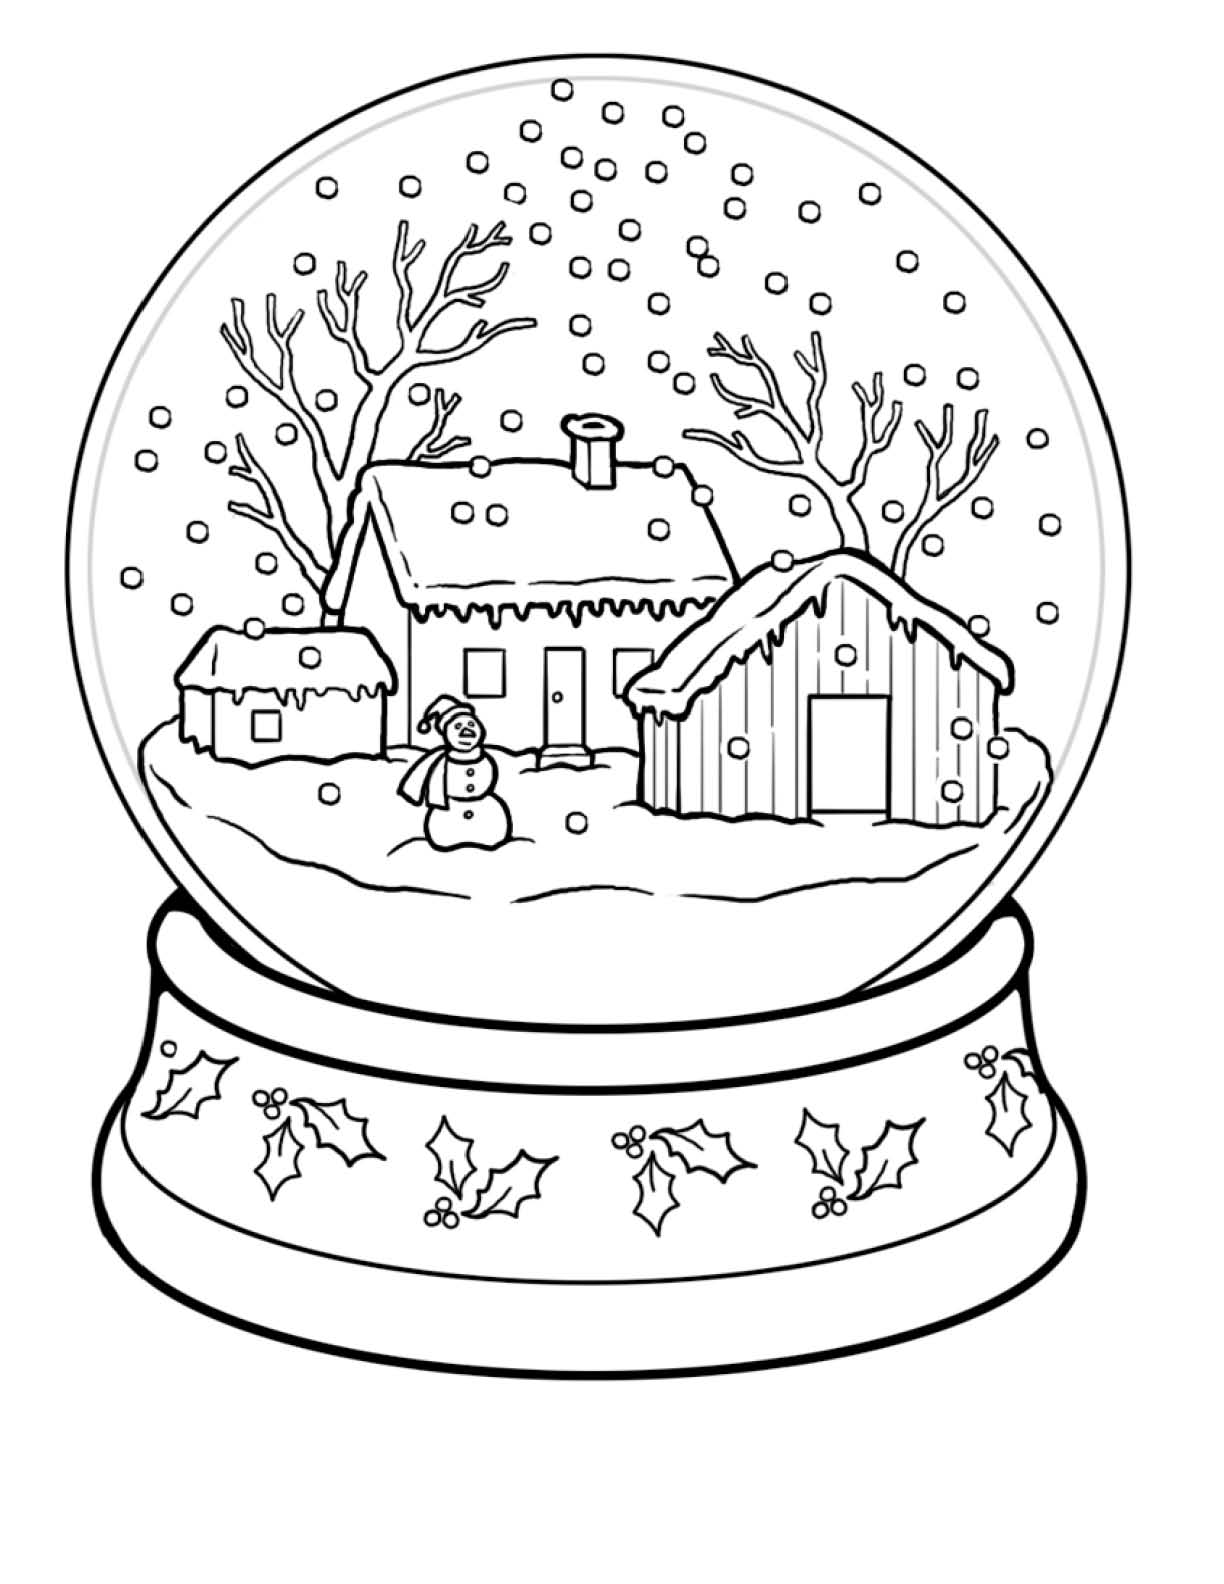 Coloring Pages Winter Scenes - High Quality Coloring Pages